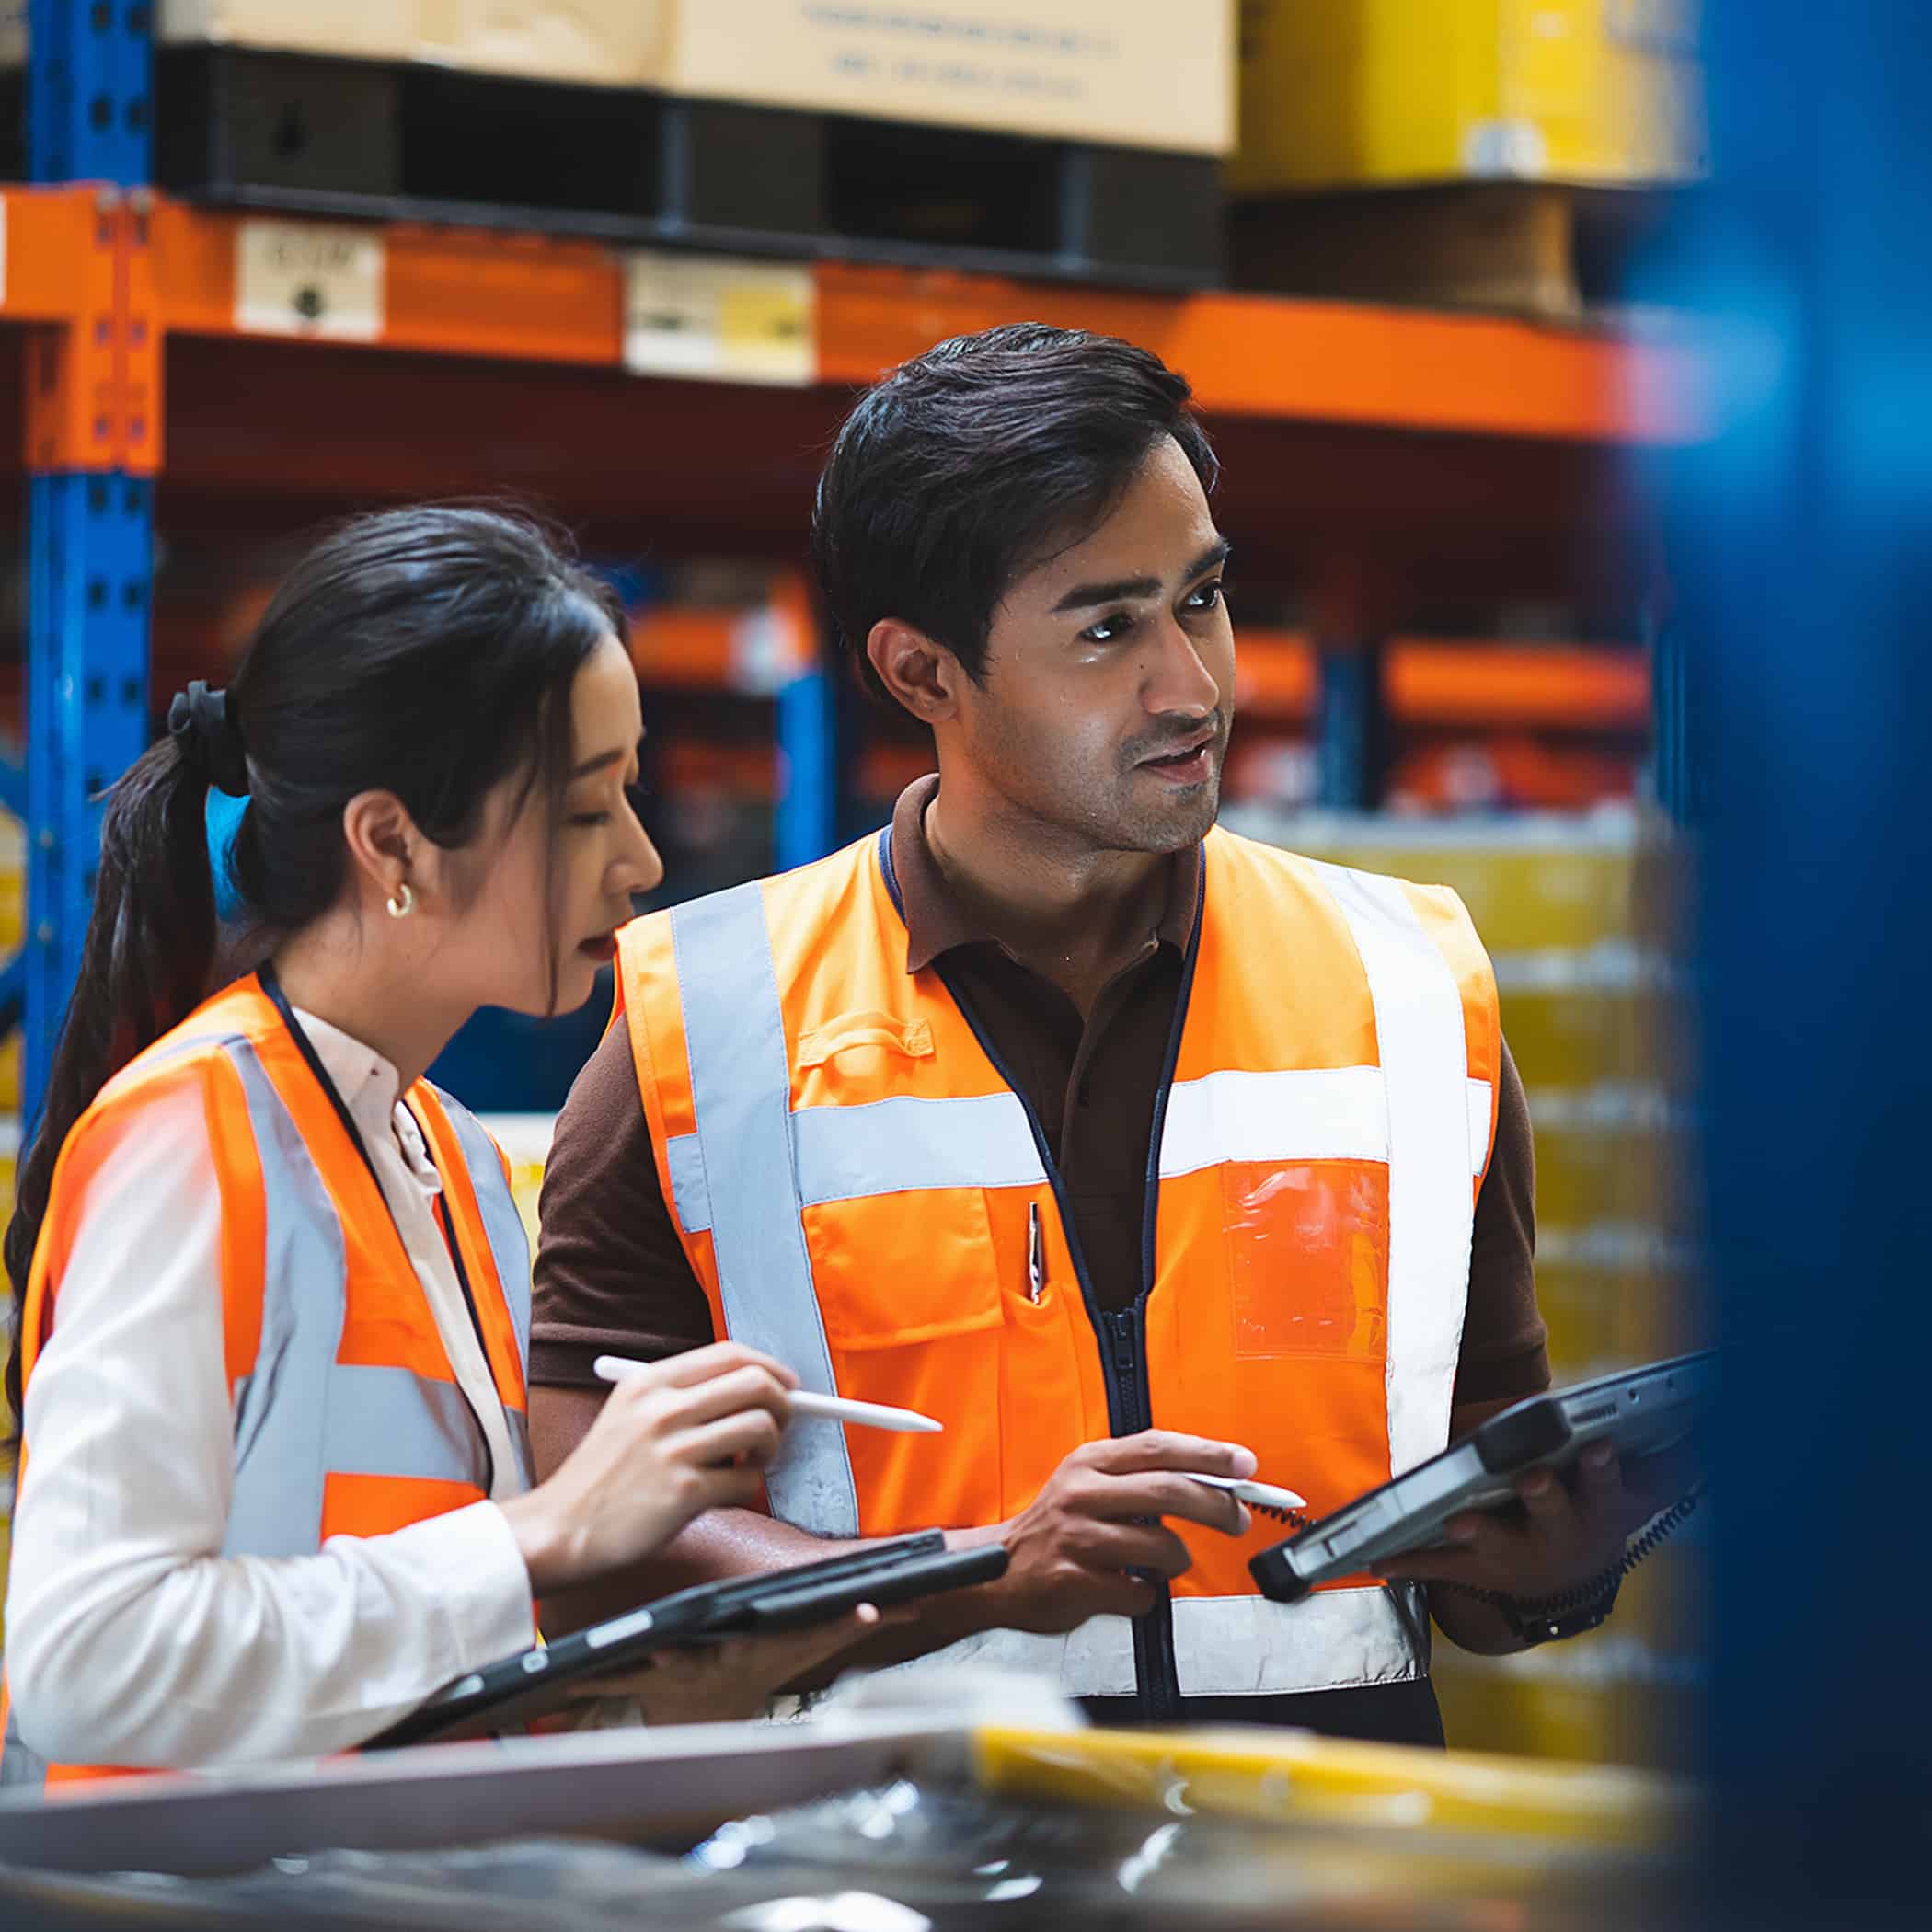 Warehouse worker and manager checks stock and inventory